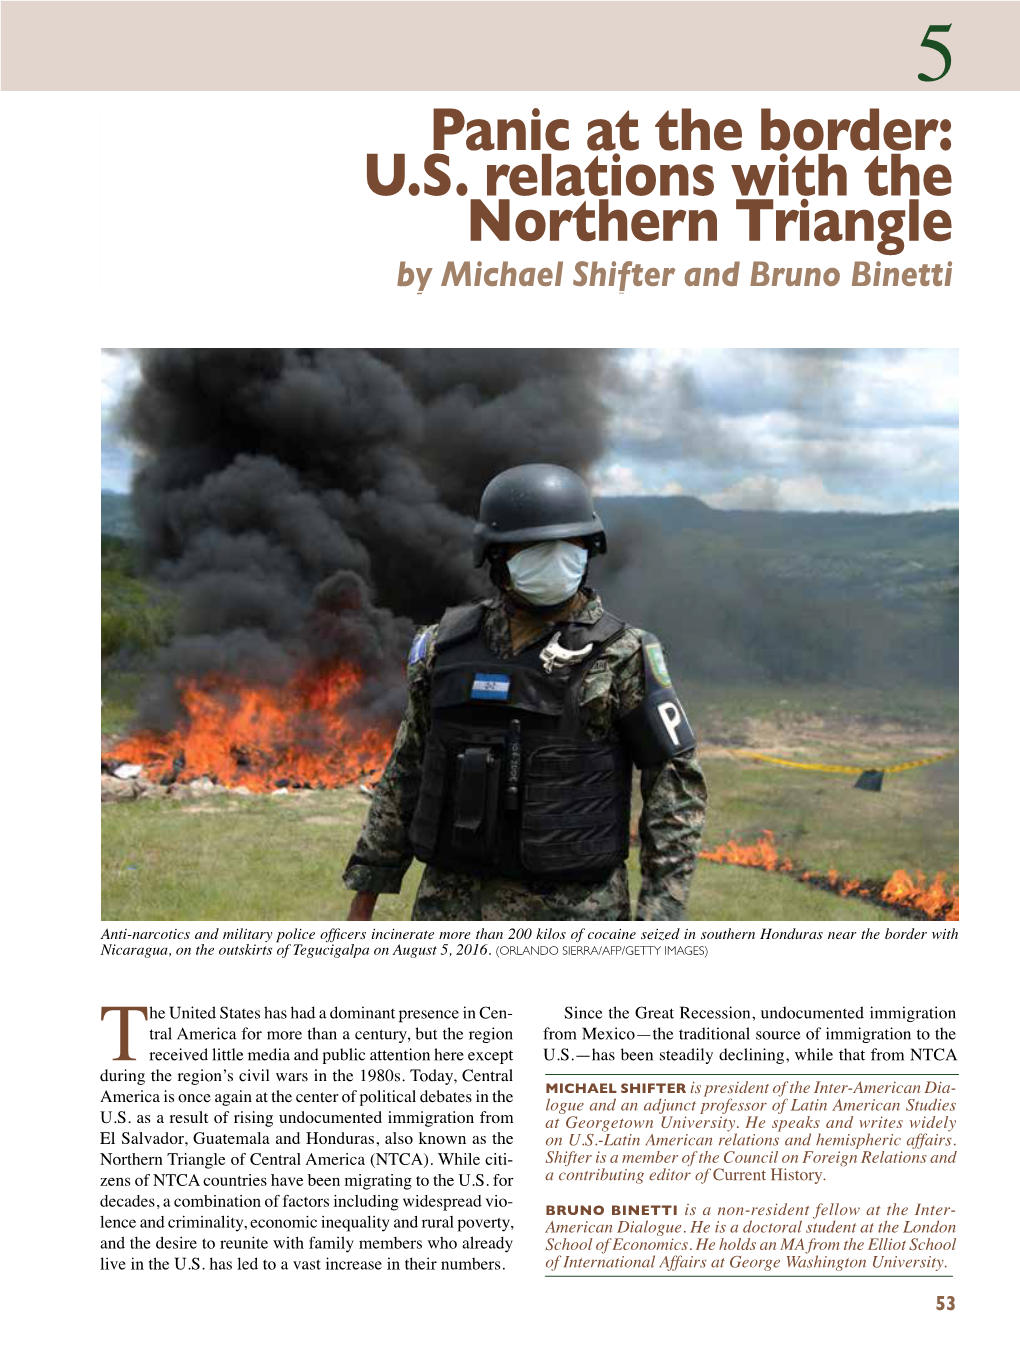 Panic at the Border: U.S. Relations with the Northern Triangle by Michael Shifter and Bruno Binetti